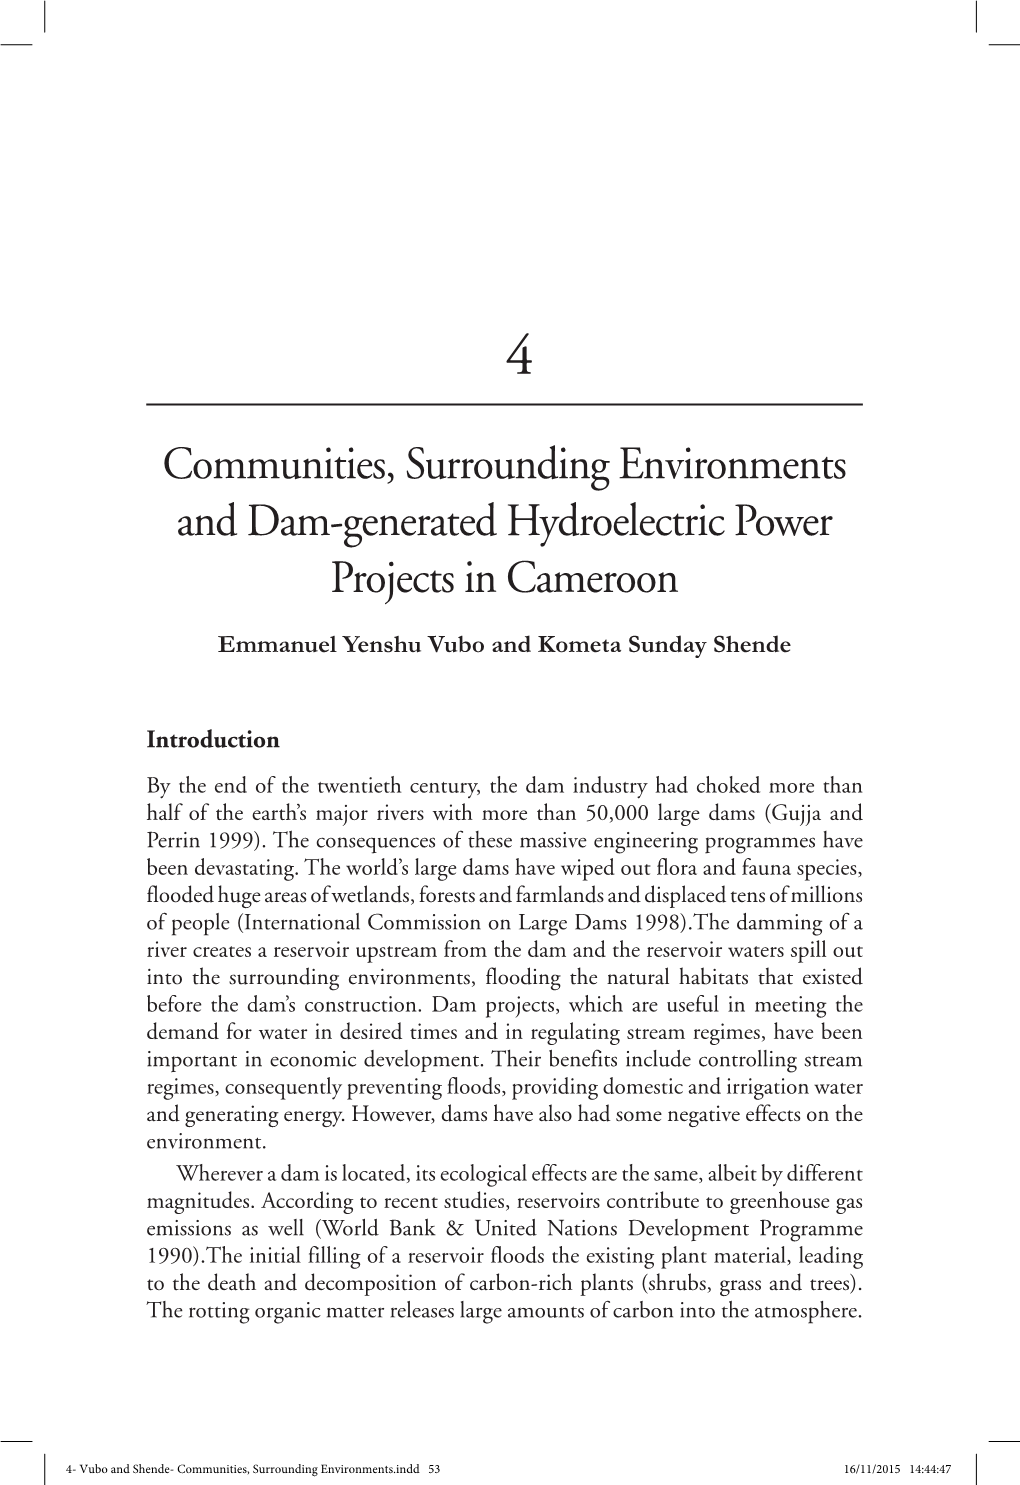 Communities, Surrounding Environments and Dam-Generated Hydroelectric Power Projects in Cameroon